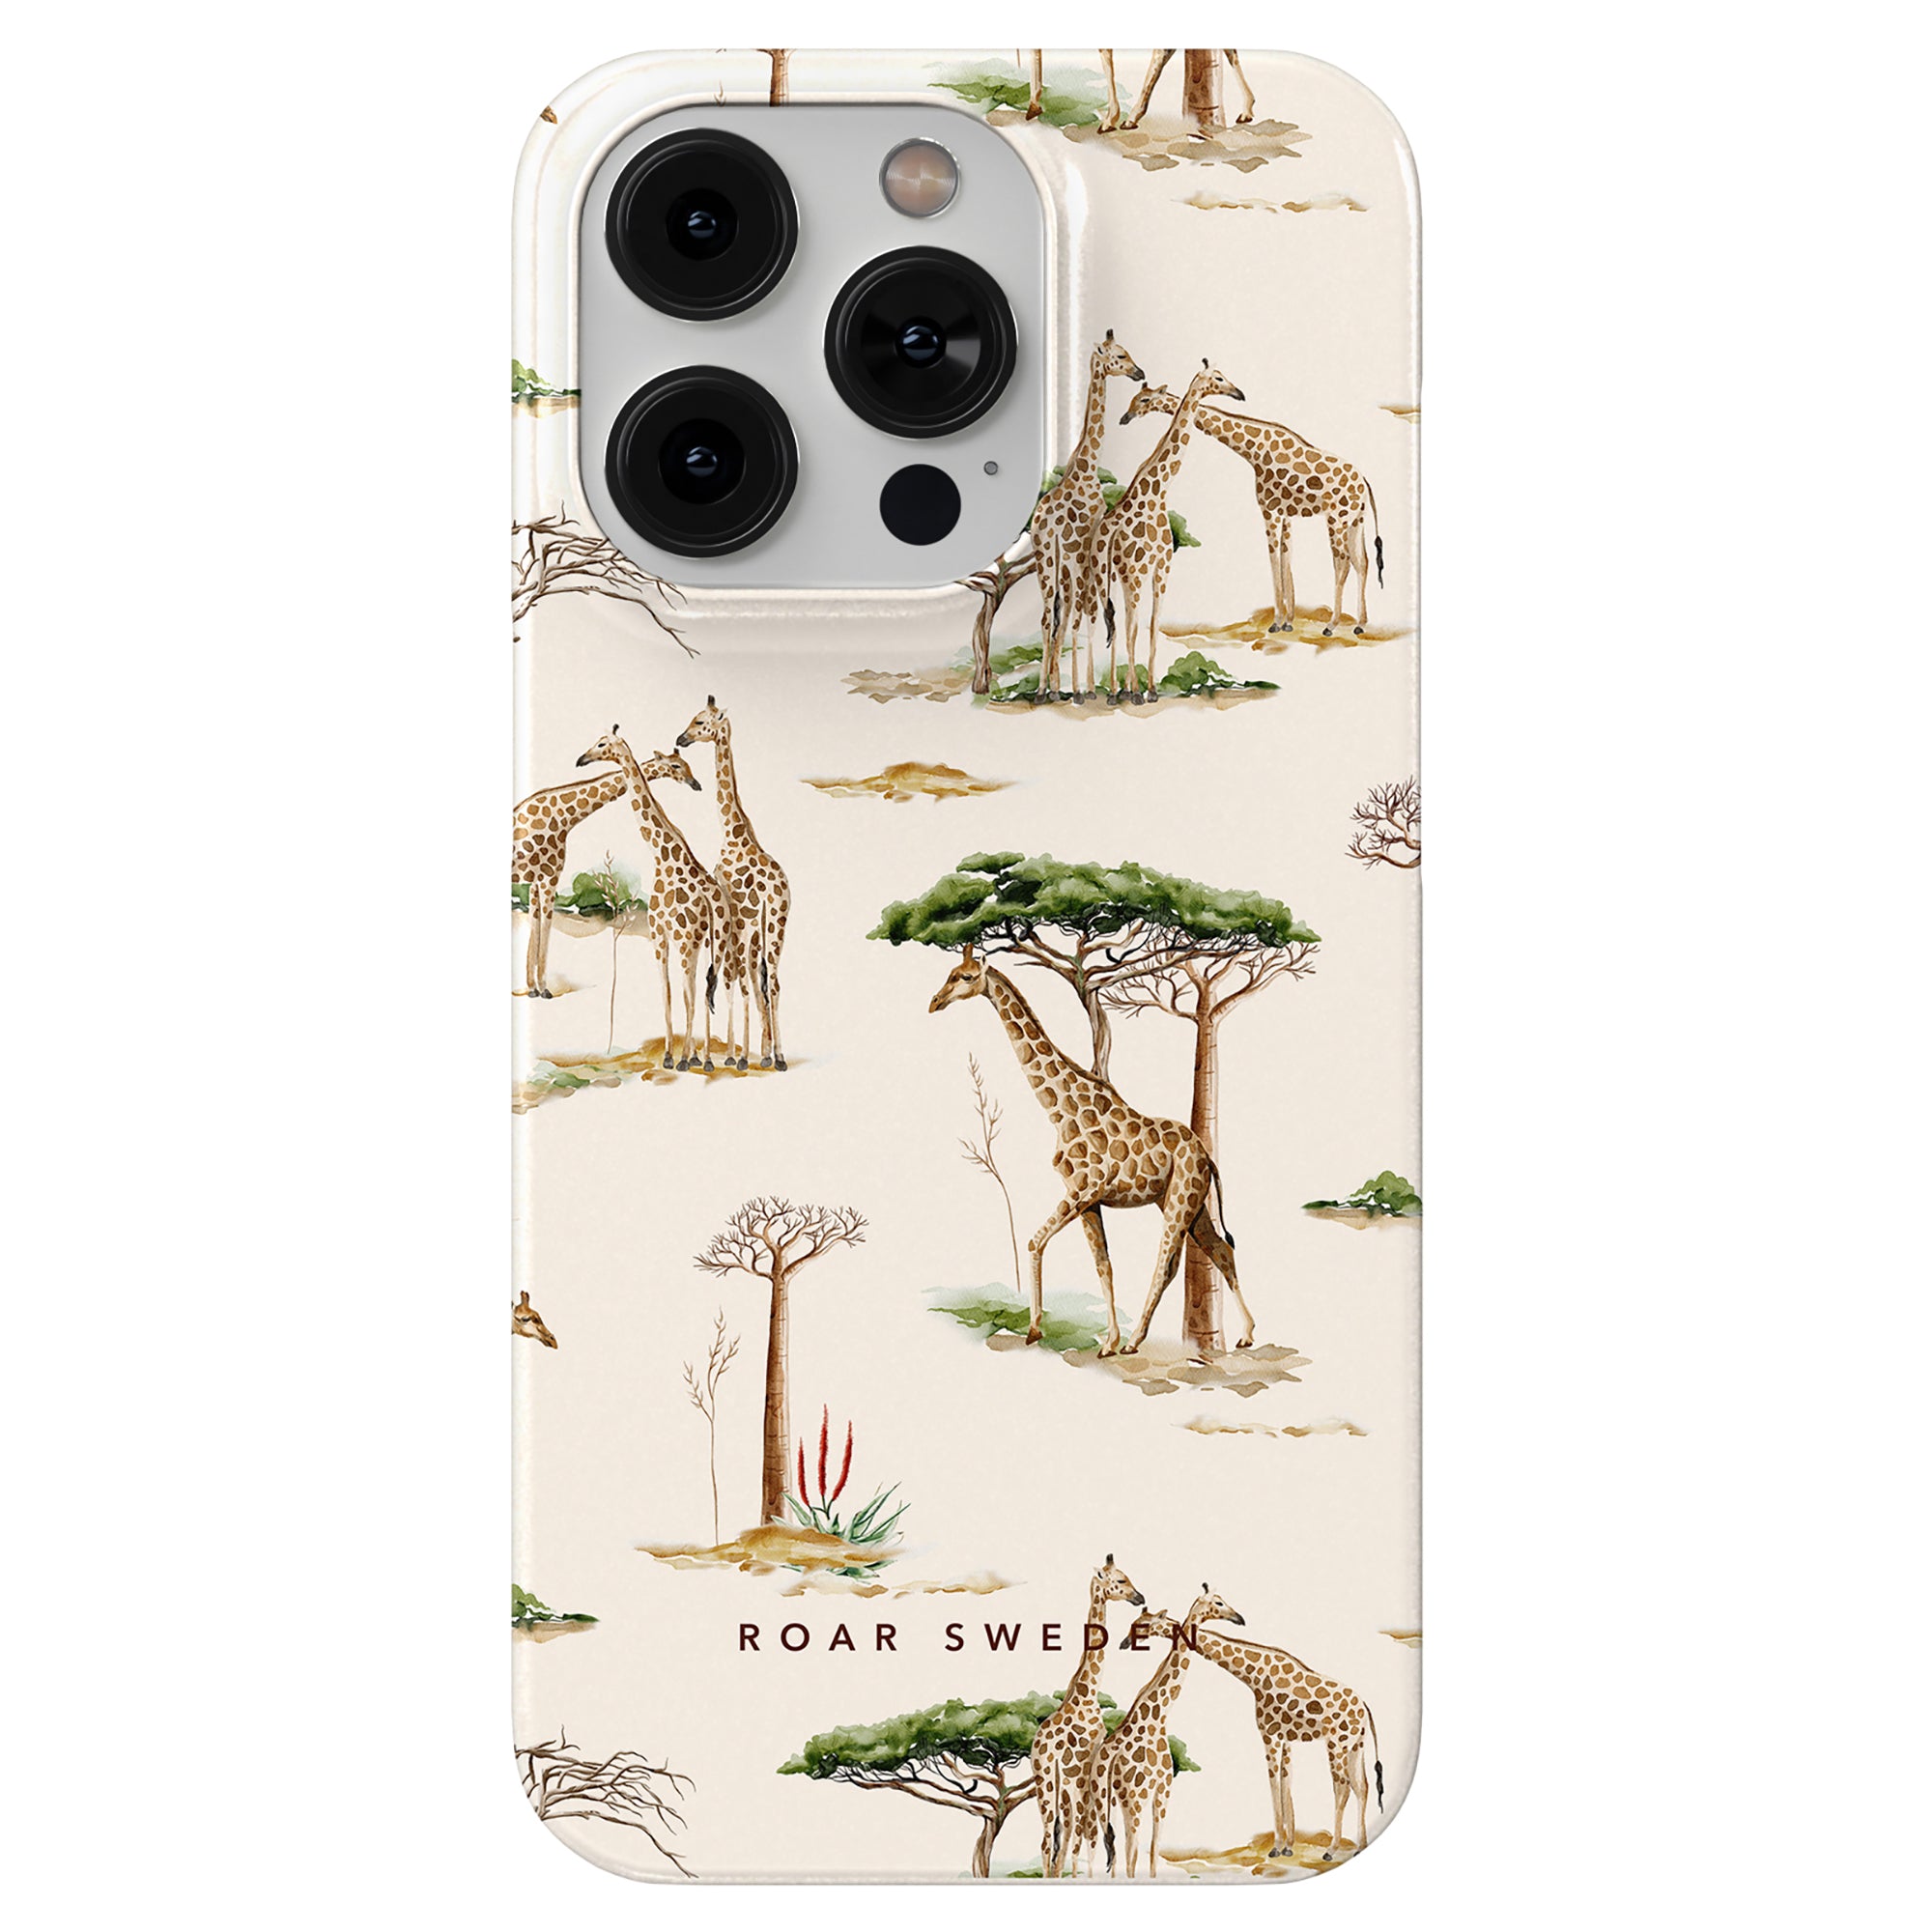 Introducing the Giraffa - Slim case from our Safari Collection—a smartphone case featuring a pattern of giraffes and trees on a cream background. The words "ROAR SWEEP" are printed at the bottom, offering both style and skydd mot repor och stötar.